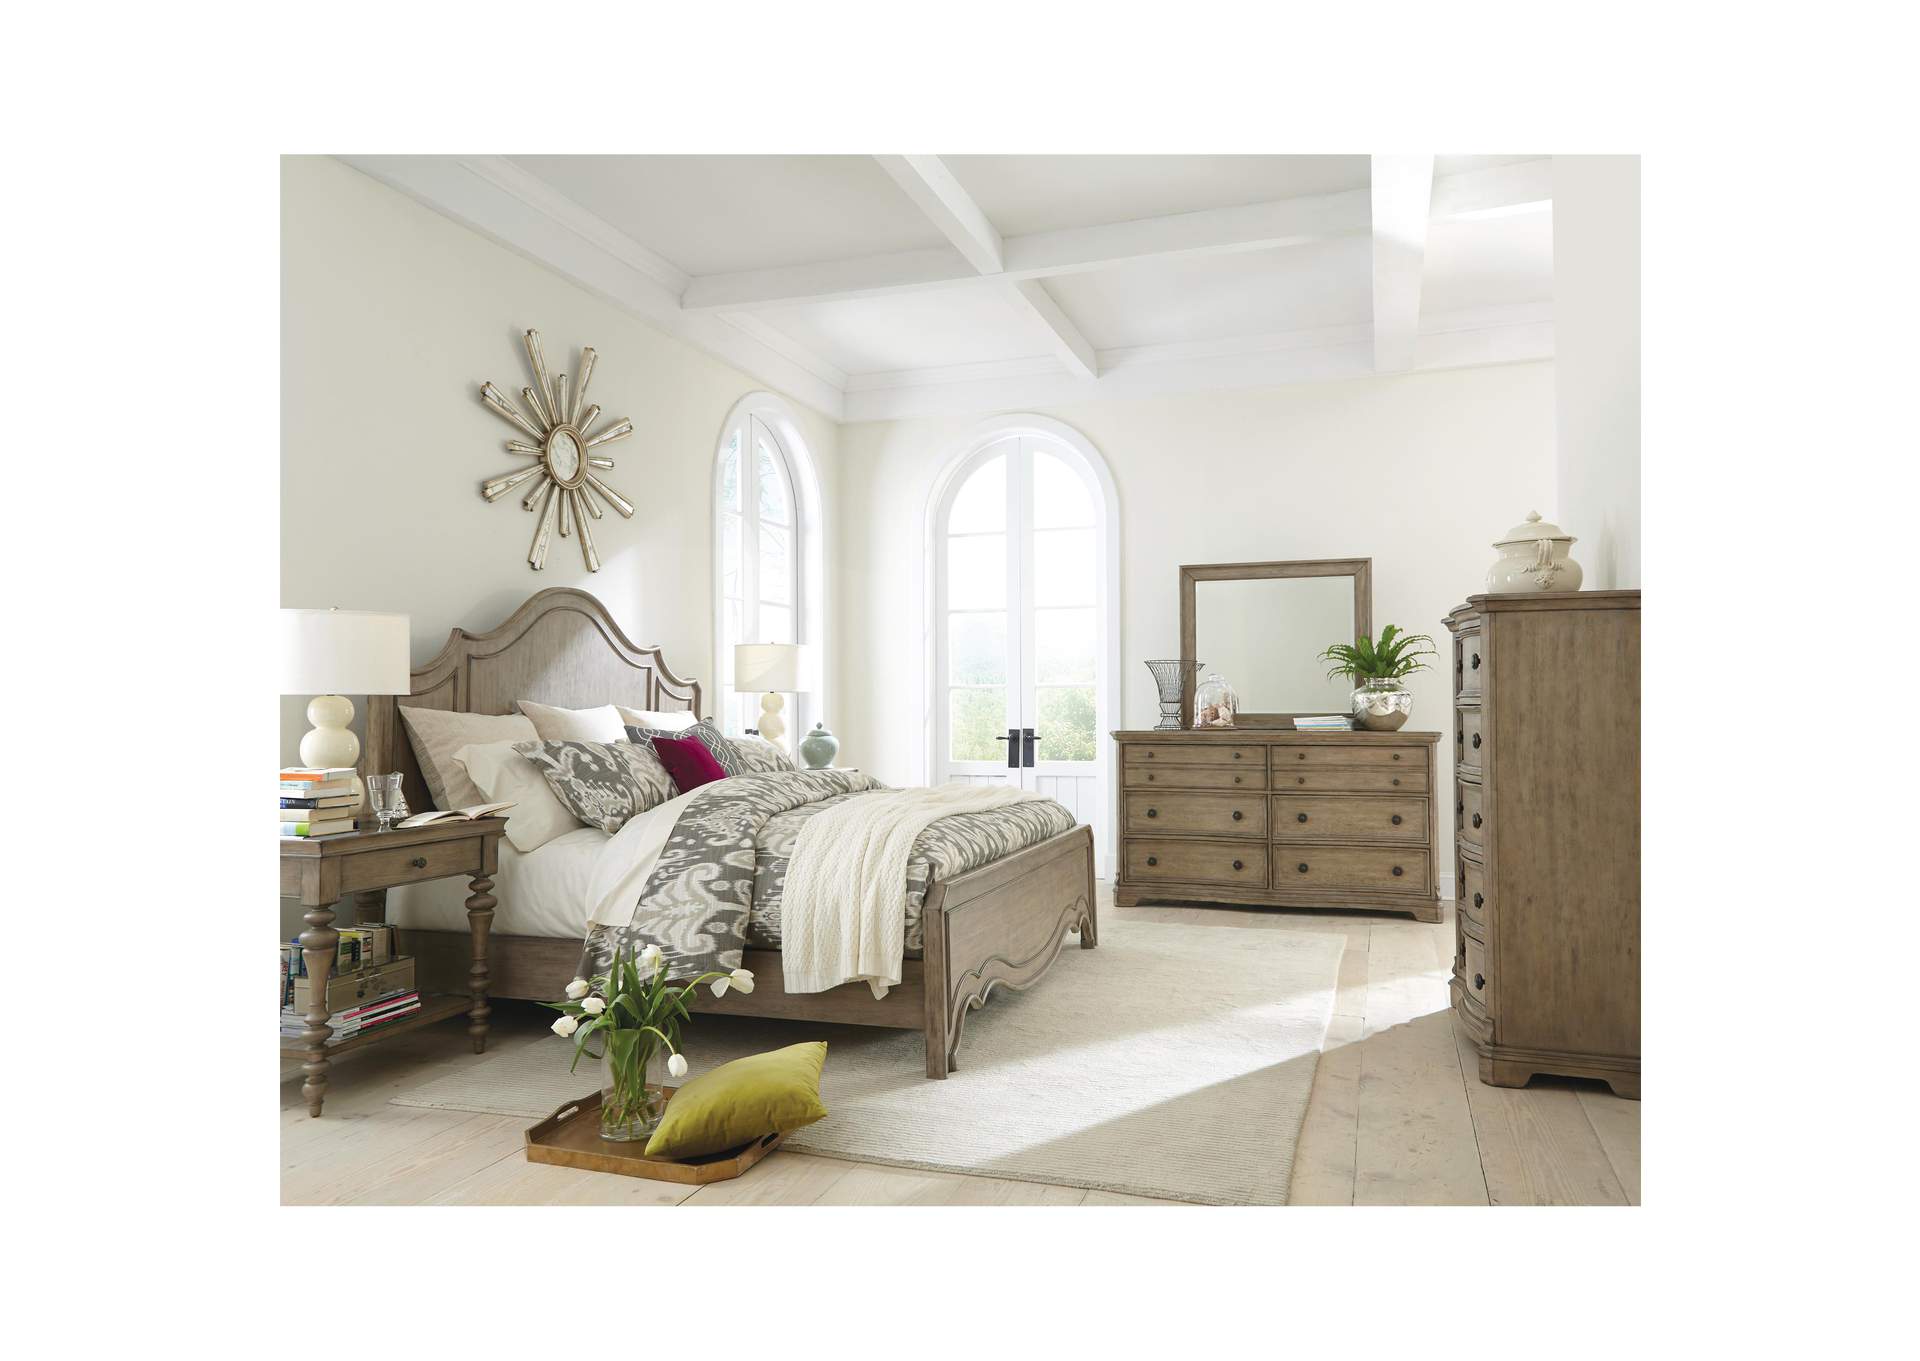 Corinne Sun-drenched Acacia Poster Queen Bed w/ Dresser, Mirror,Riverside